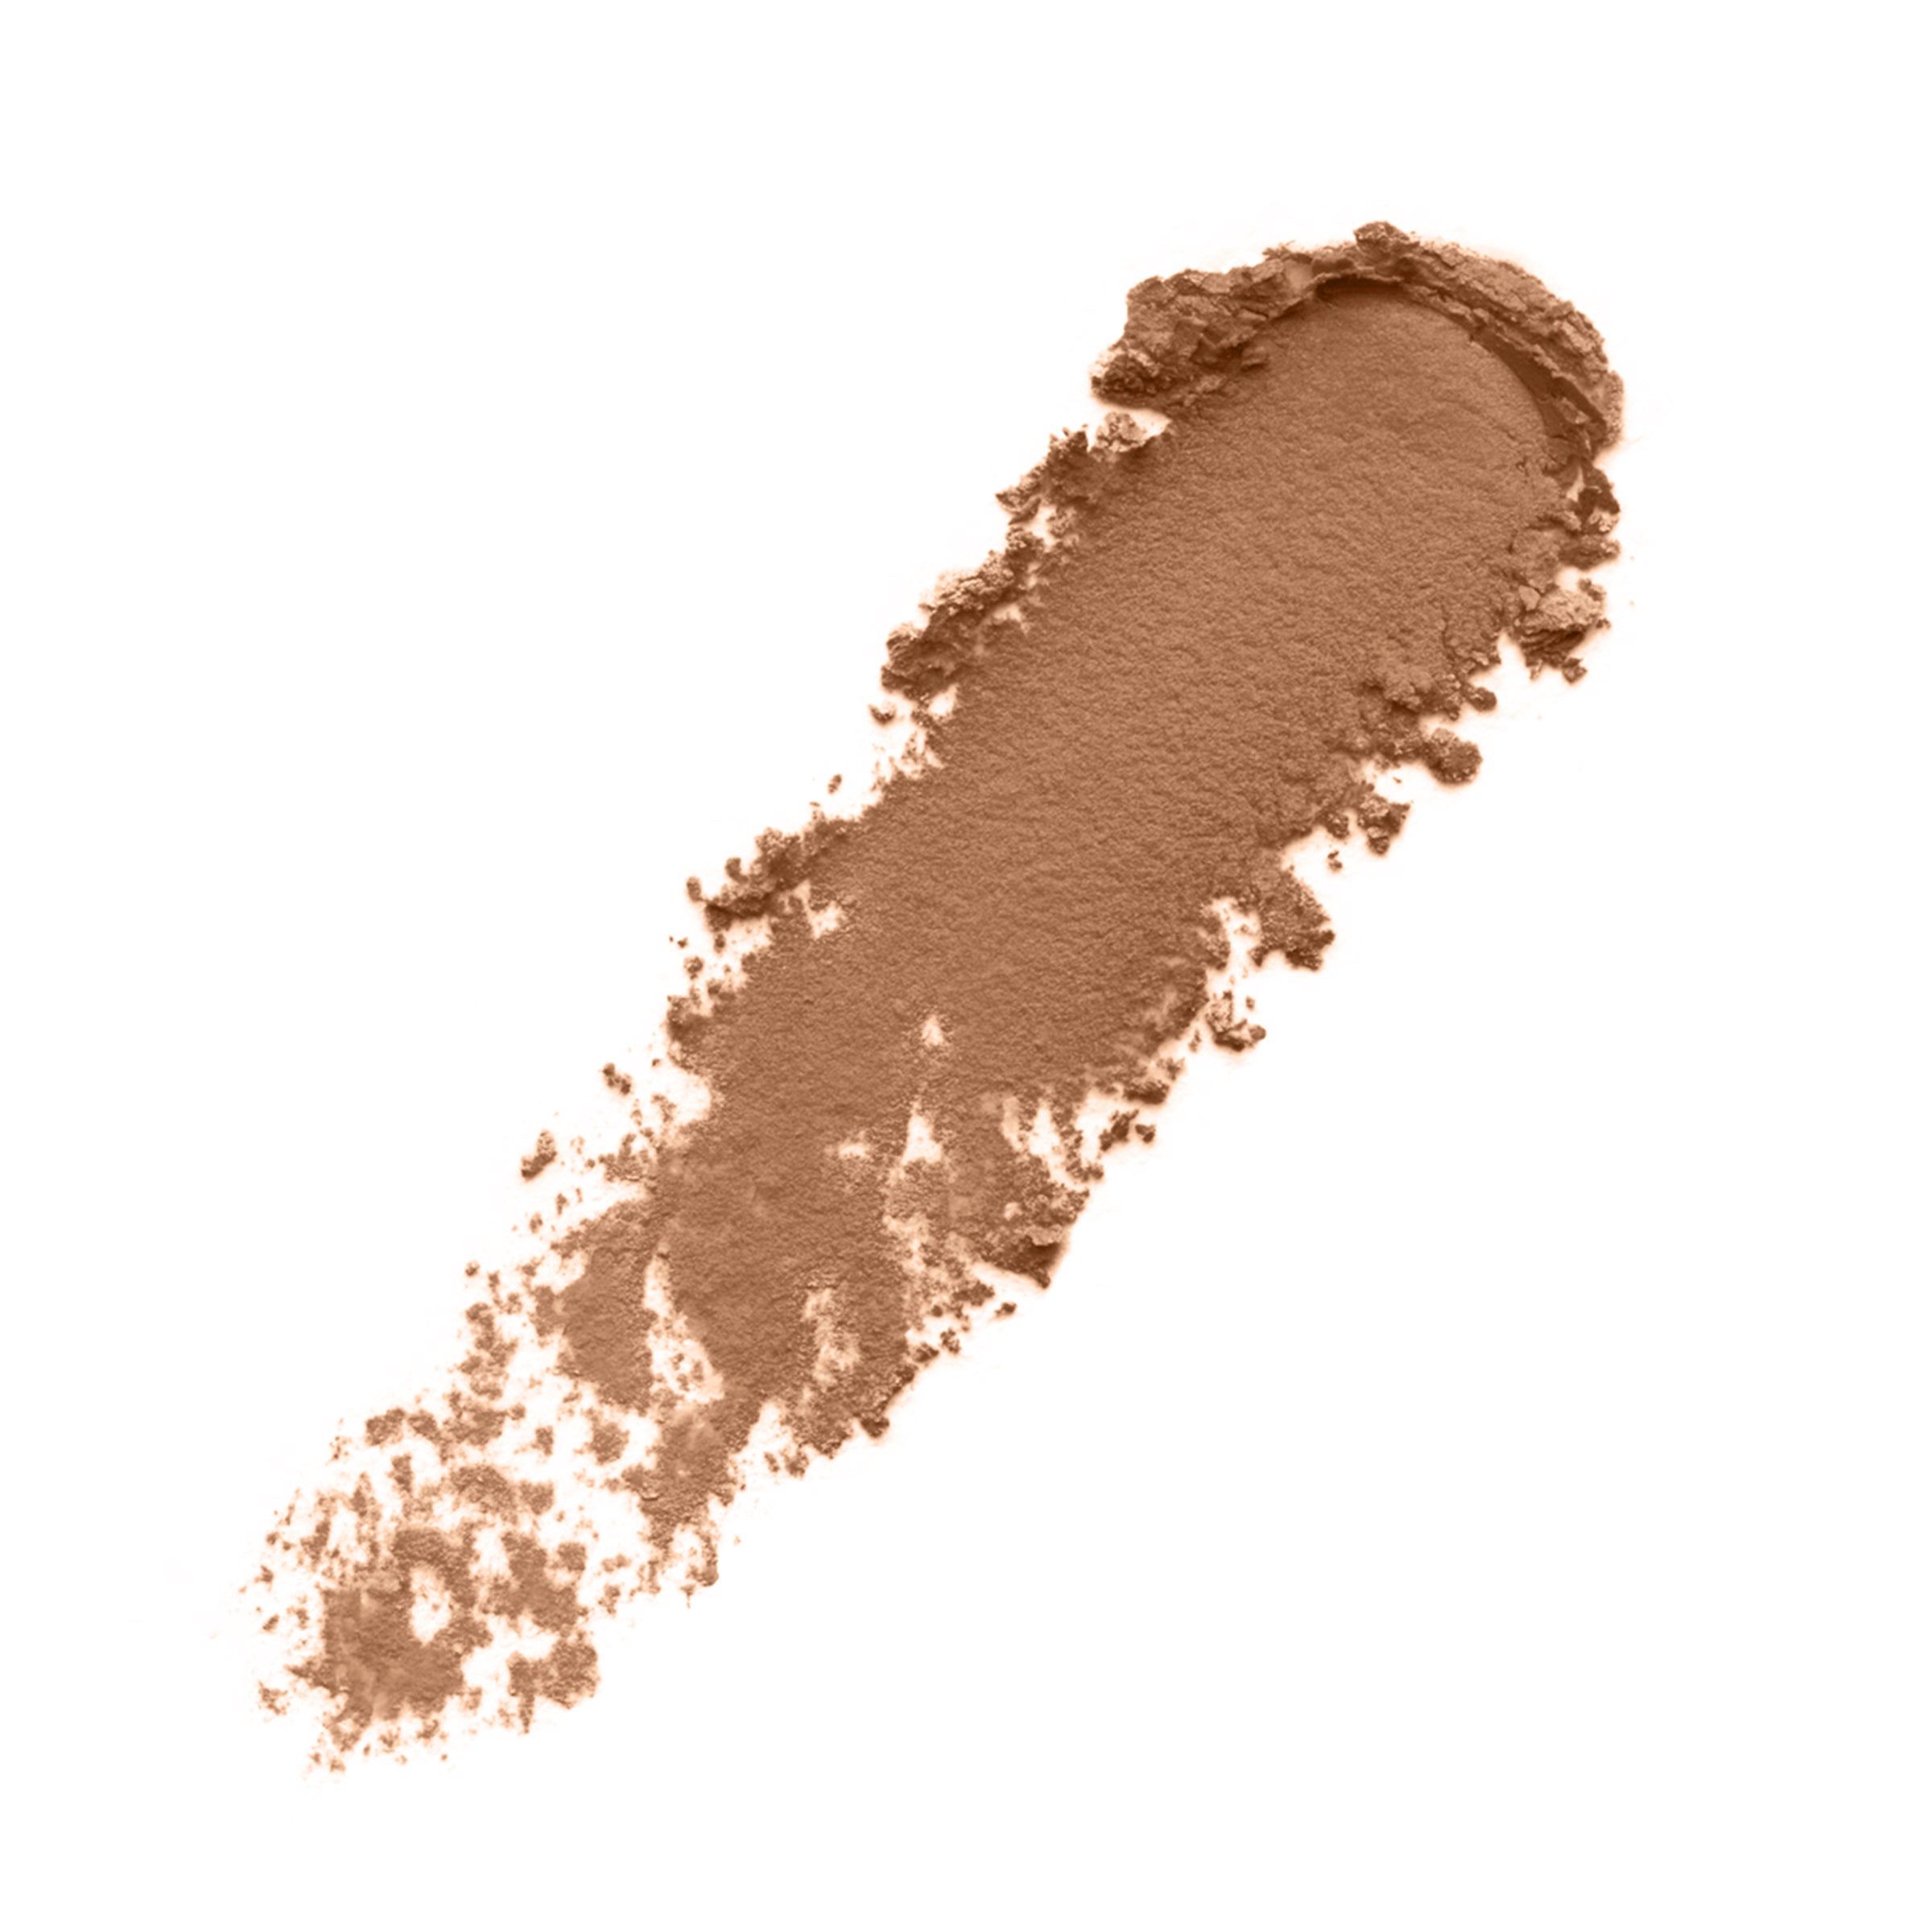 SOLEIL DOUX - NEUTRAL UNDERTONE - bronzer refill swatch for light to medium complexions and neutral undertones in a satin finish